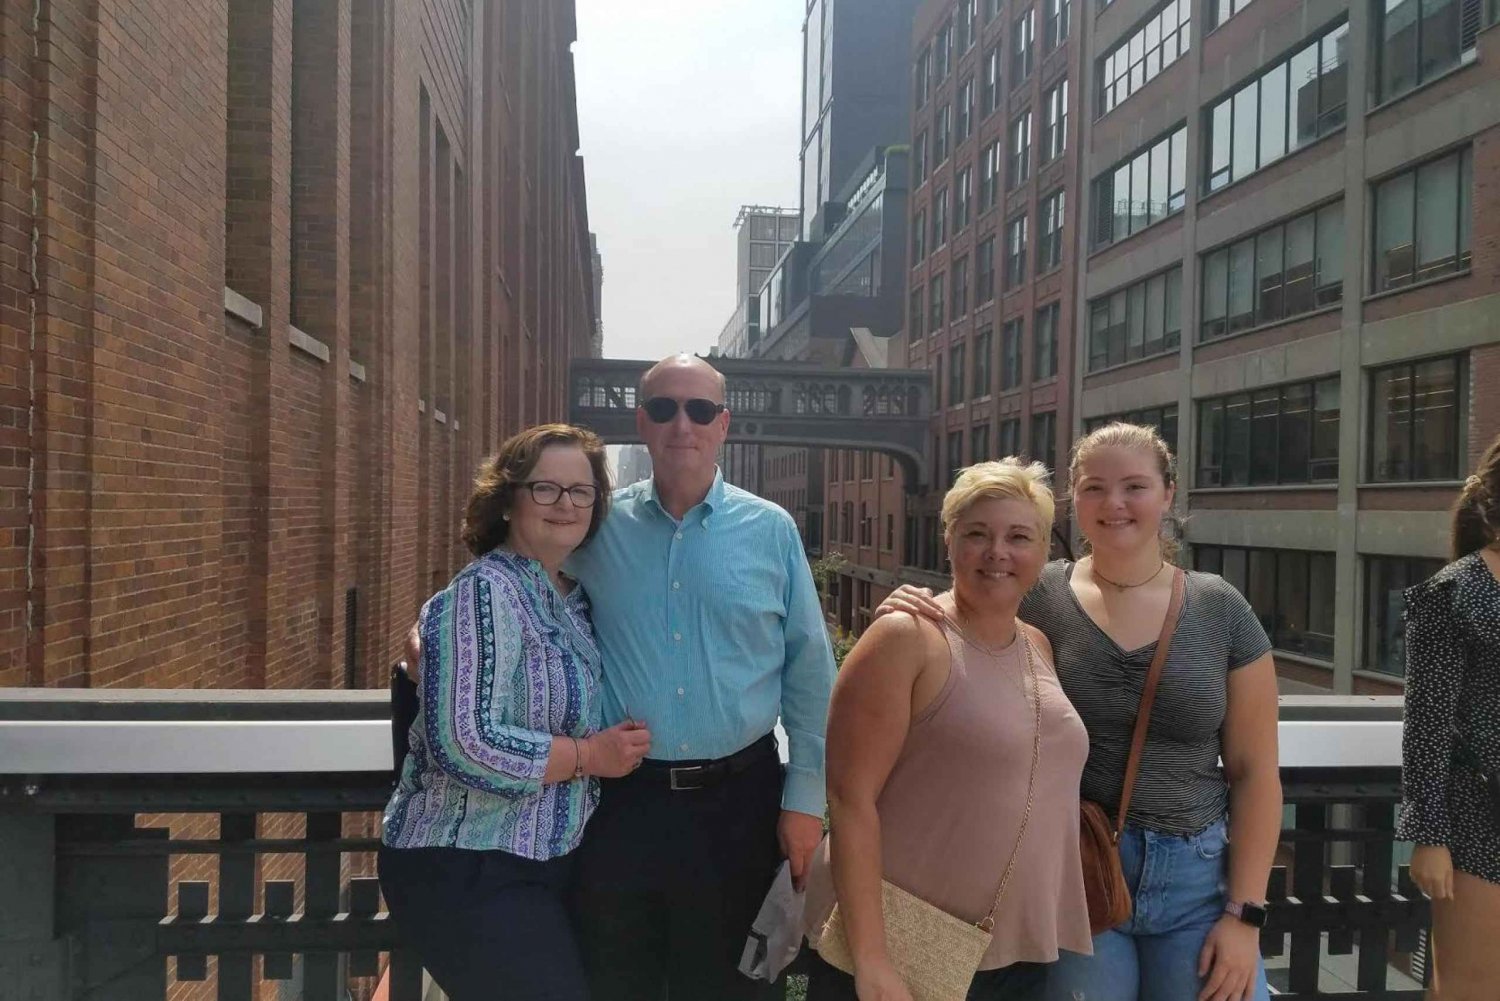 Meatpacking District: Chelsea Market and The Highline Tour